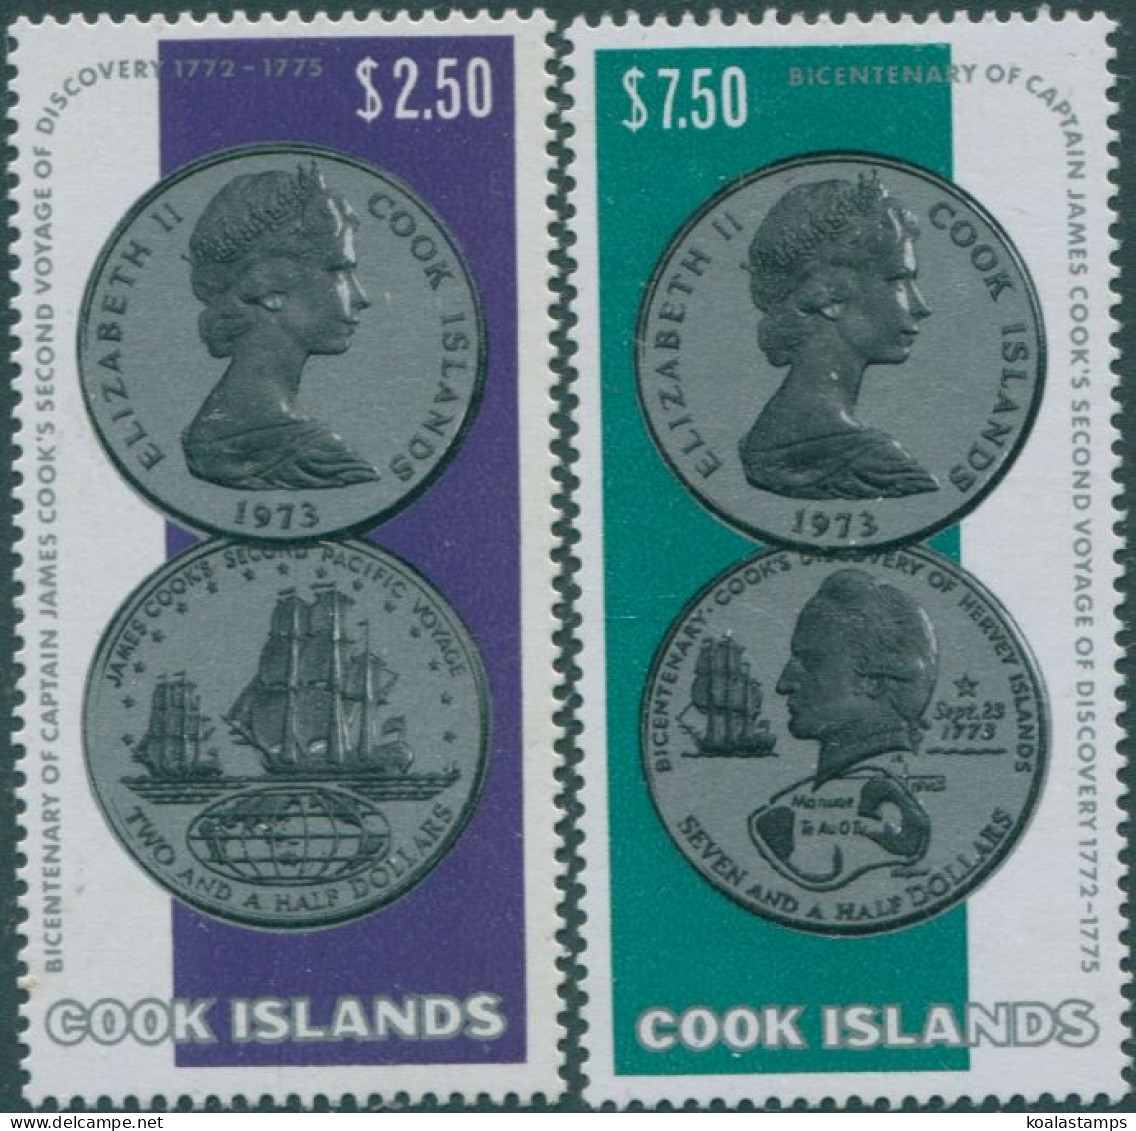 Cook Islands 1974 SG492-493 Cook Second Voyage Set MNH - Cookinseln